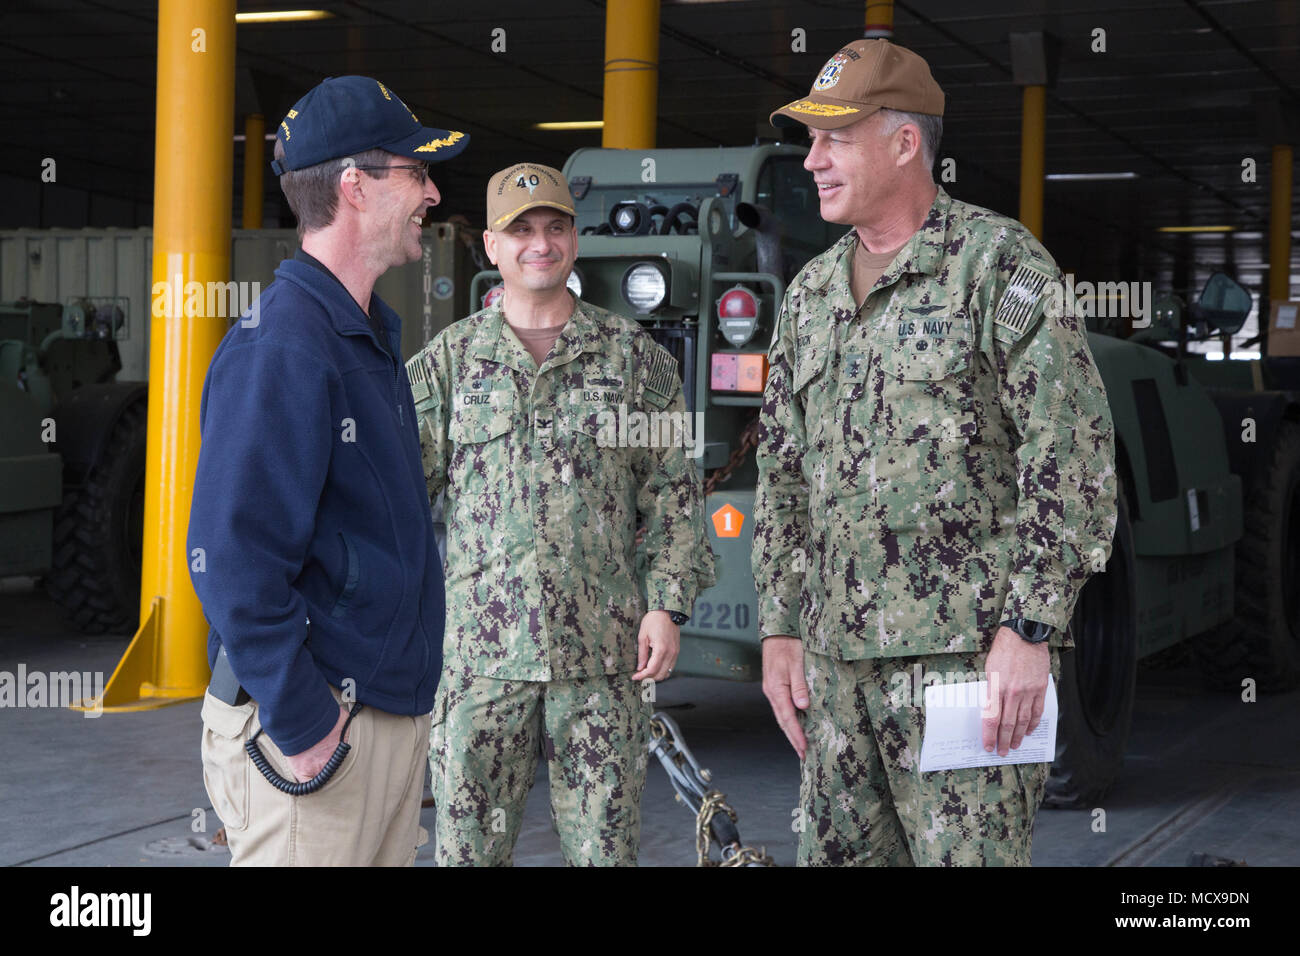 180305-A-WO440-0026 MAYPORT, Fla. (March 5, 2018) Capt. Douglas Casavant, Master of the USNS Spearhead, from Chesapeake, Virginia, and Capt. Angel Cruz, Commodore of Destroyer Squadron (DESRON) 40, greet Rear Admiral Sean Buck, Commander, U.S. Naval Forces Southern Command/U.S. 4th Fleet, aboard the expeditionary fast transport vessel USNS Spearhead (T-EPF 1). U.S. Naval Forces Southern Command/U.S. 4th Fleet has deployed a force to execute Continuing Promise to conduct civil-military operations including humanitarian assistance, training engagments, and medical, dental, and veterinary support Stock Photo